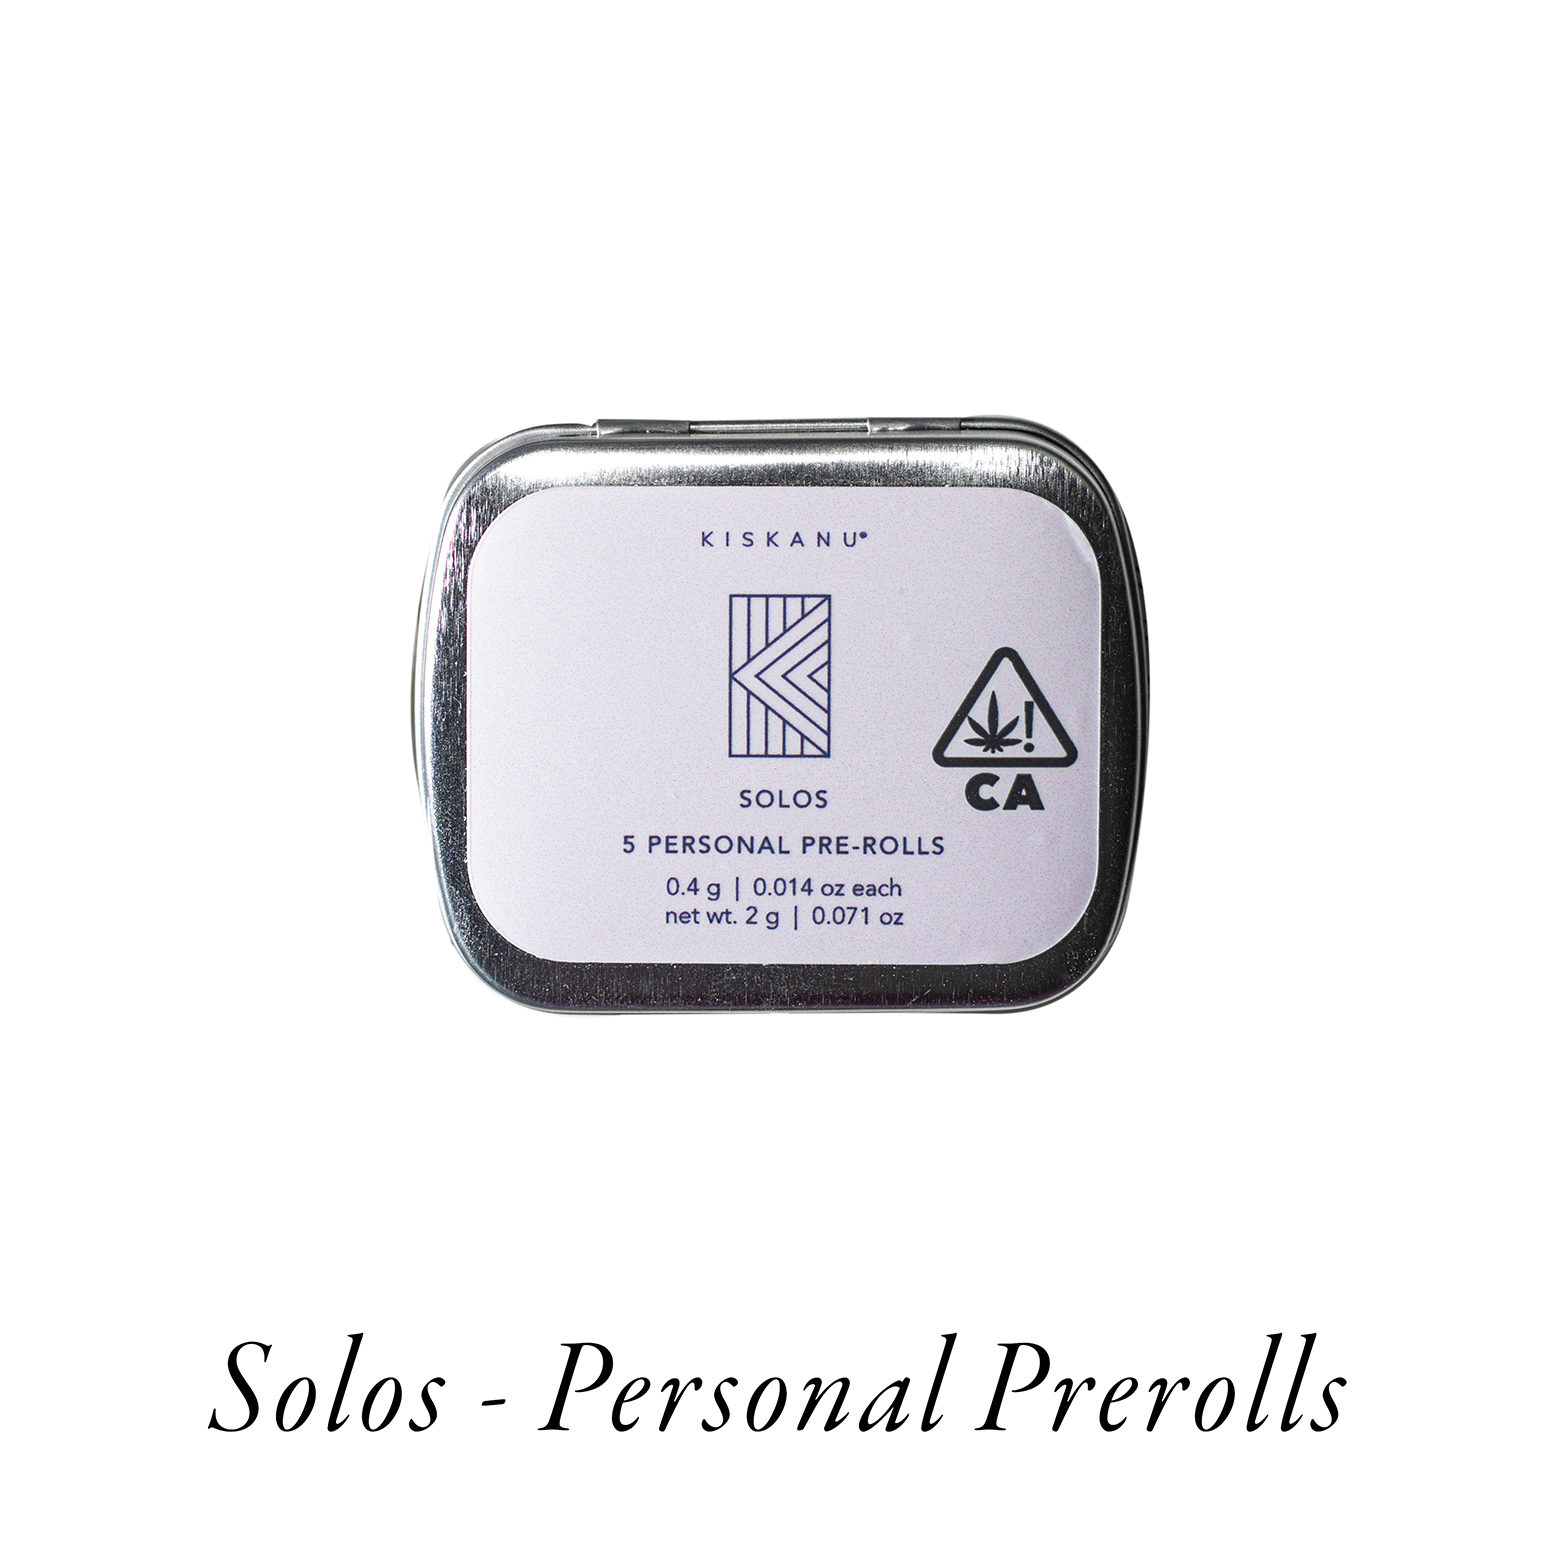 PRODUCT GRAPHIC - SOLOS - PERSONAL PREROLLS